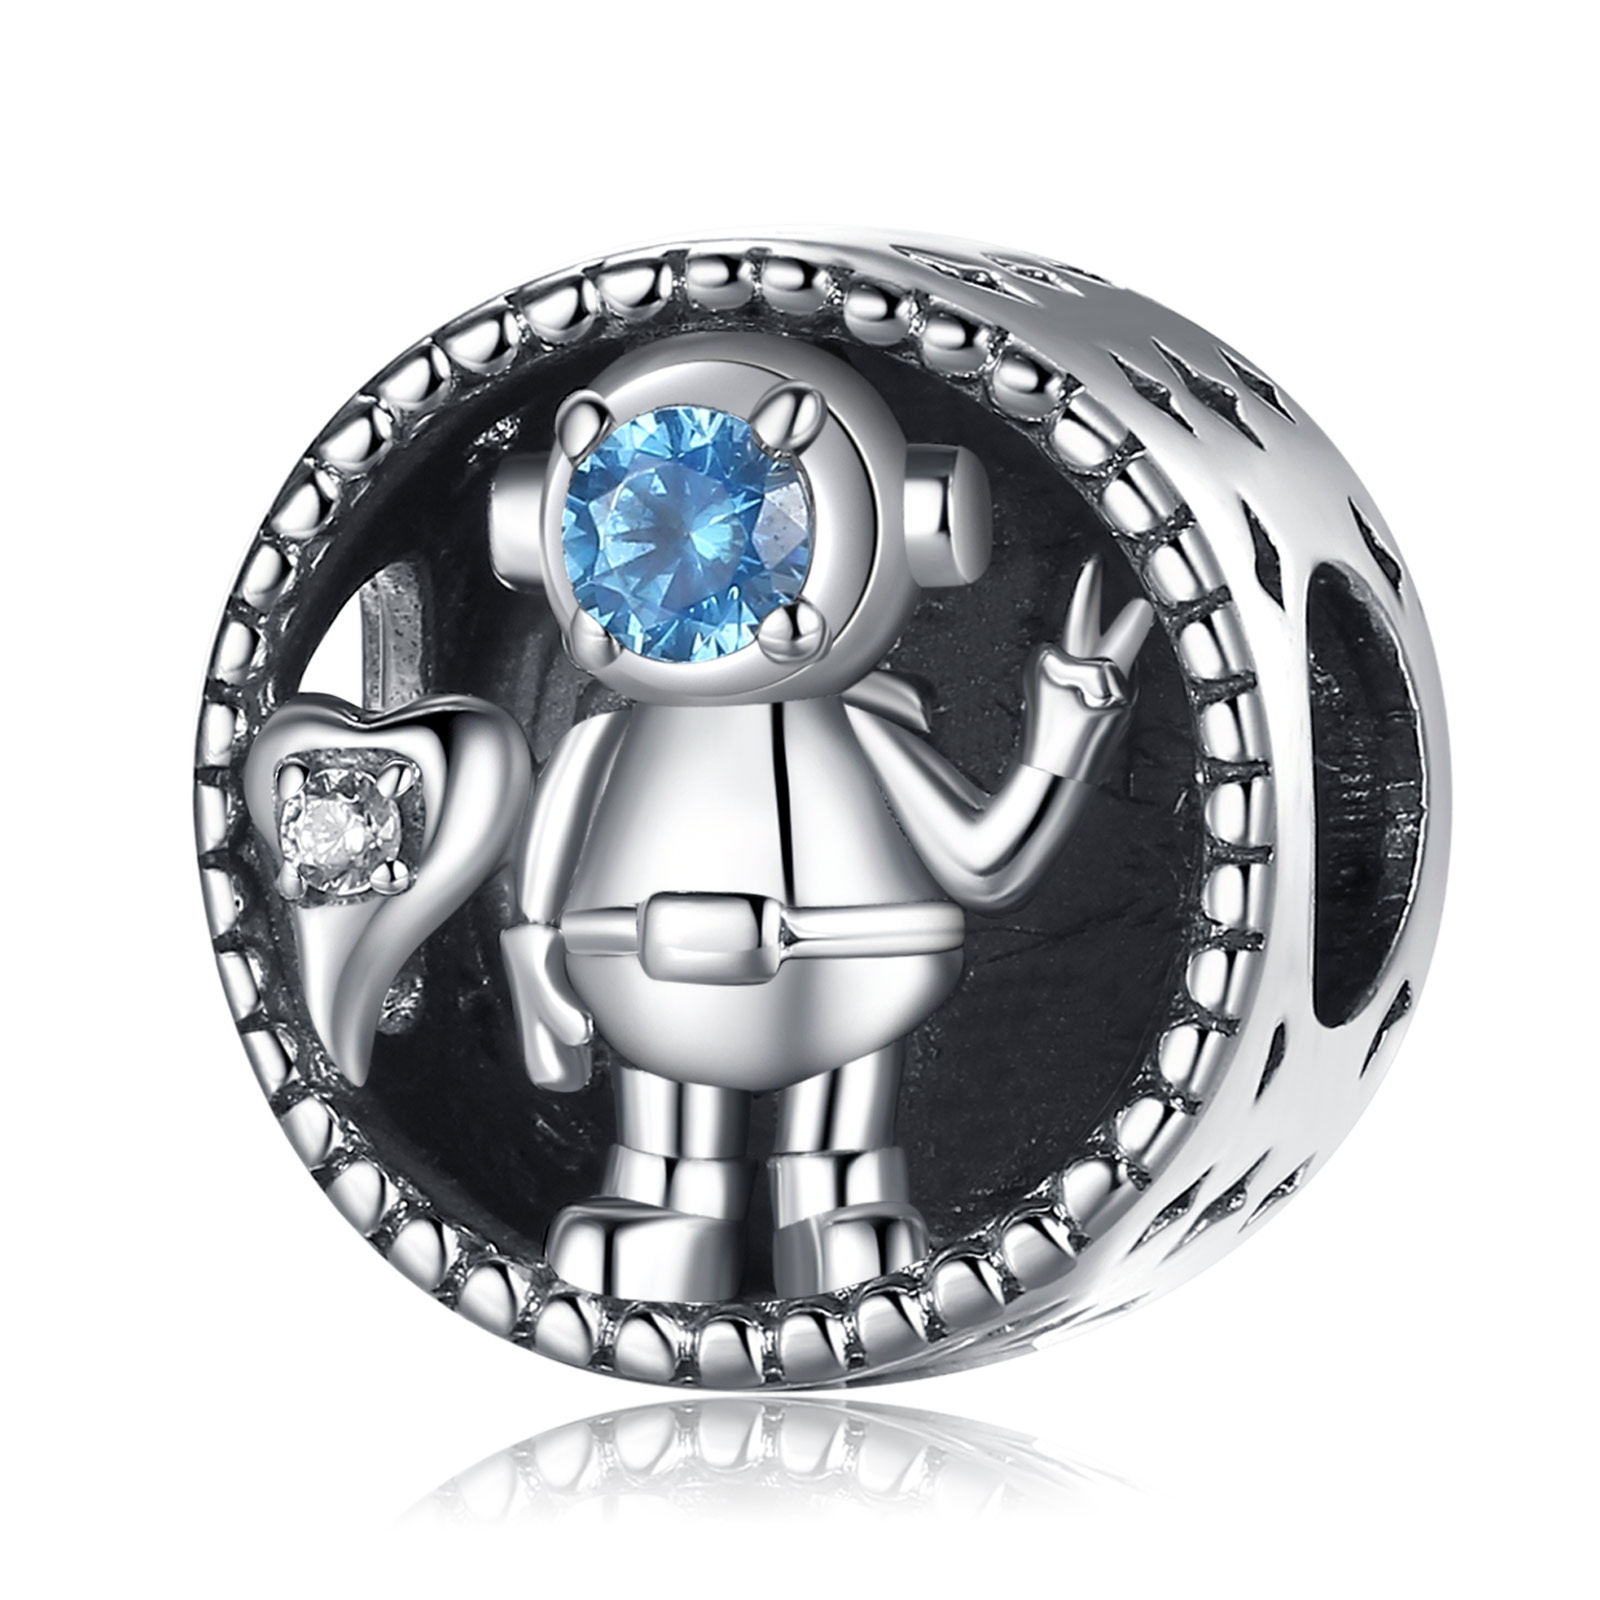 Merryshine Fine Jewelry 925 Sterling Silver Astronaut-Inspired Round Shaped Beads for Bracelets DIY with Blue Cubic Zirconia